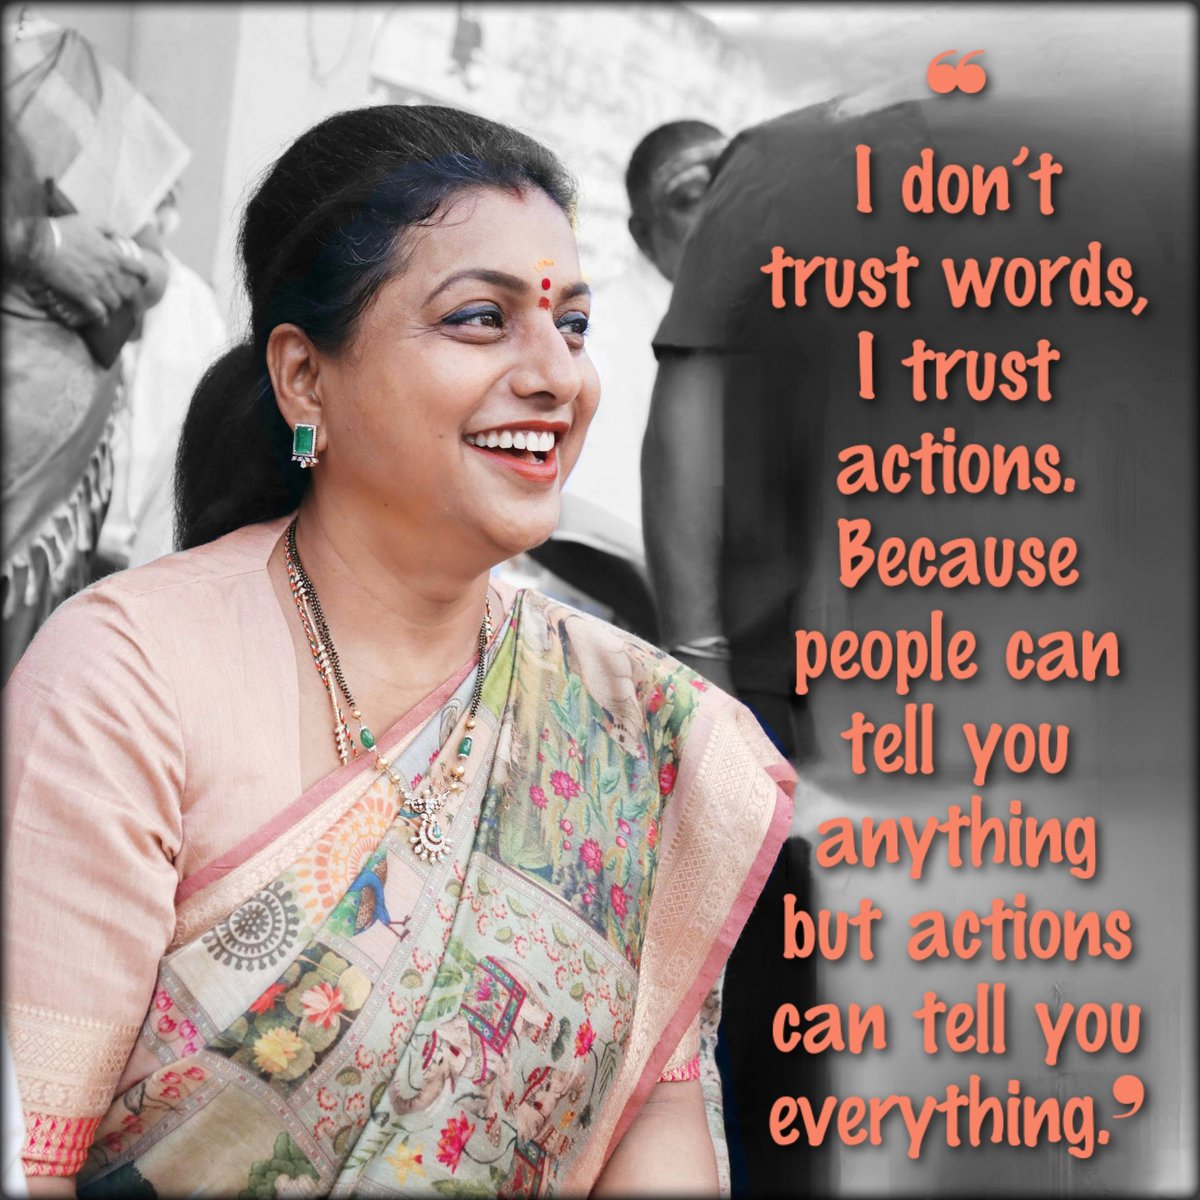 ❝ I don’t trust words, I trust actions. Because people can tell you anything but actions can tell you everything.❜ #QuoteOfTheDay